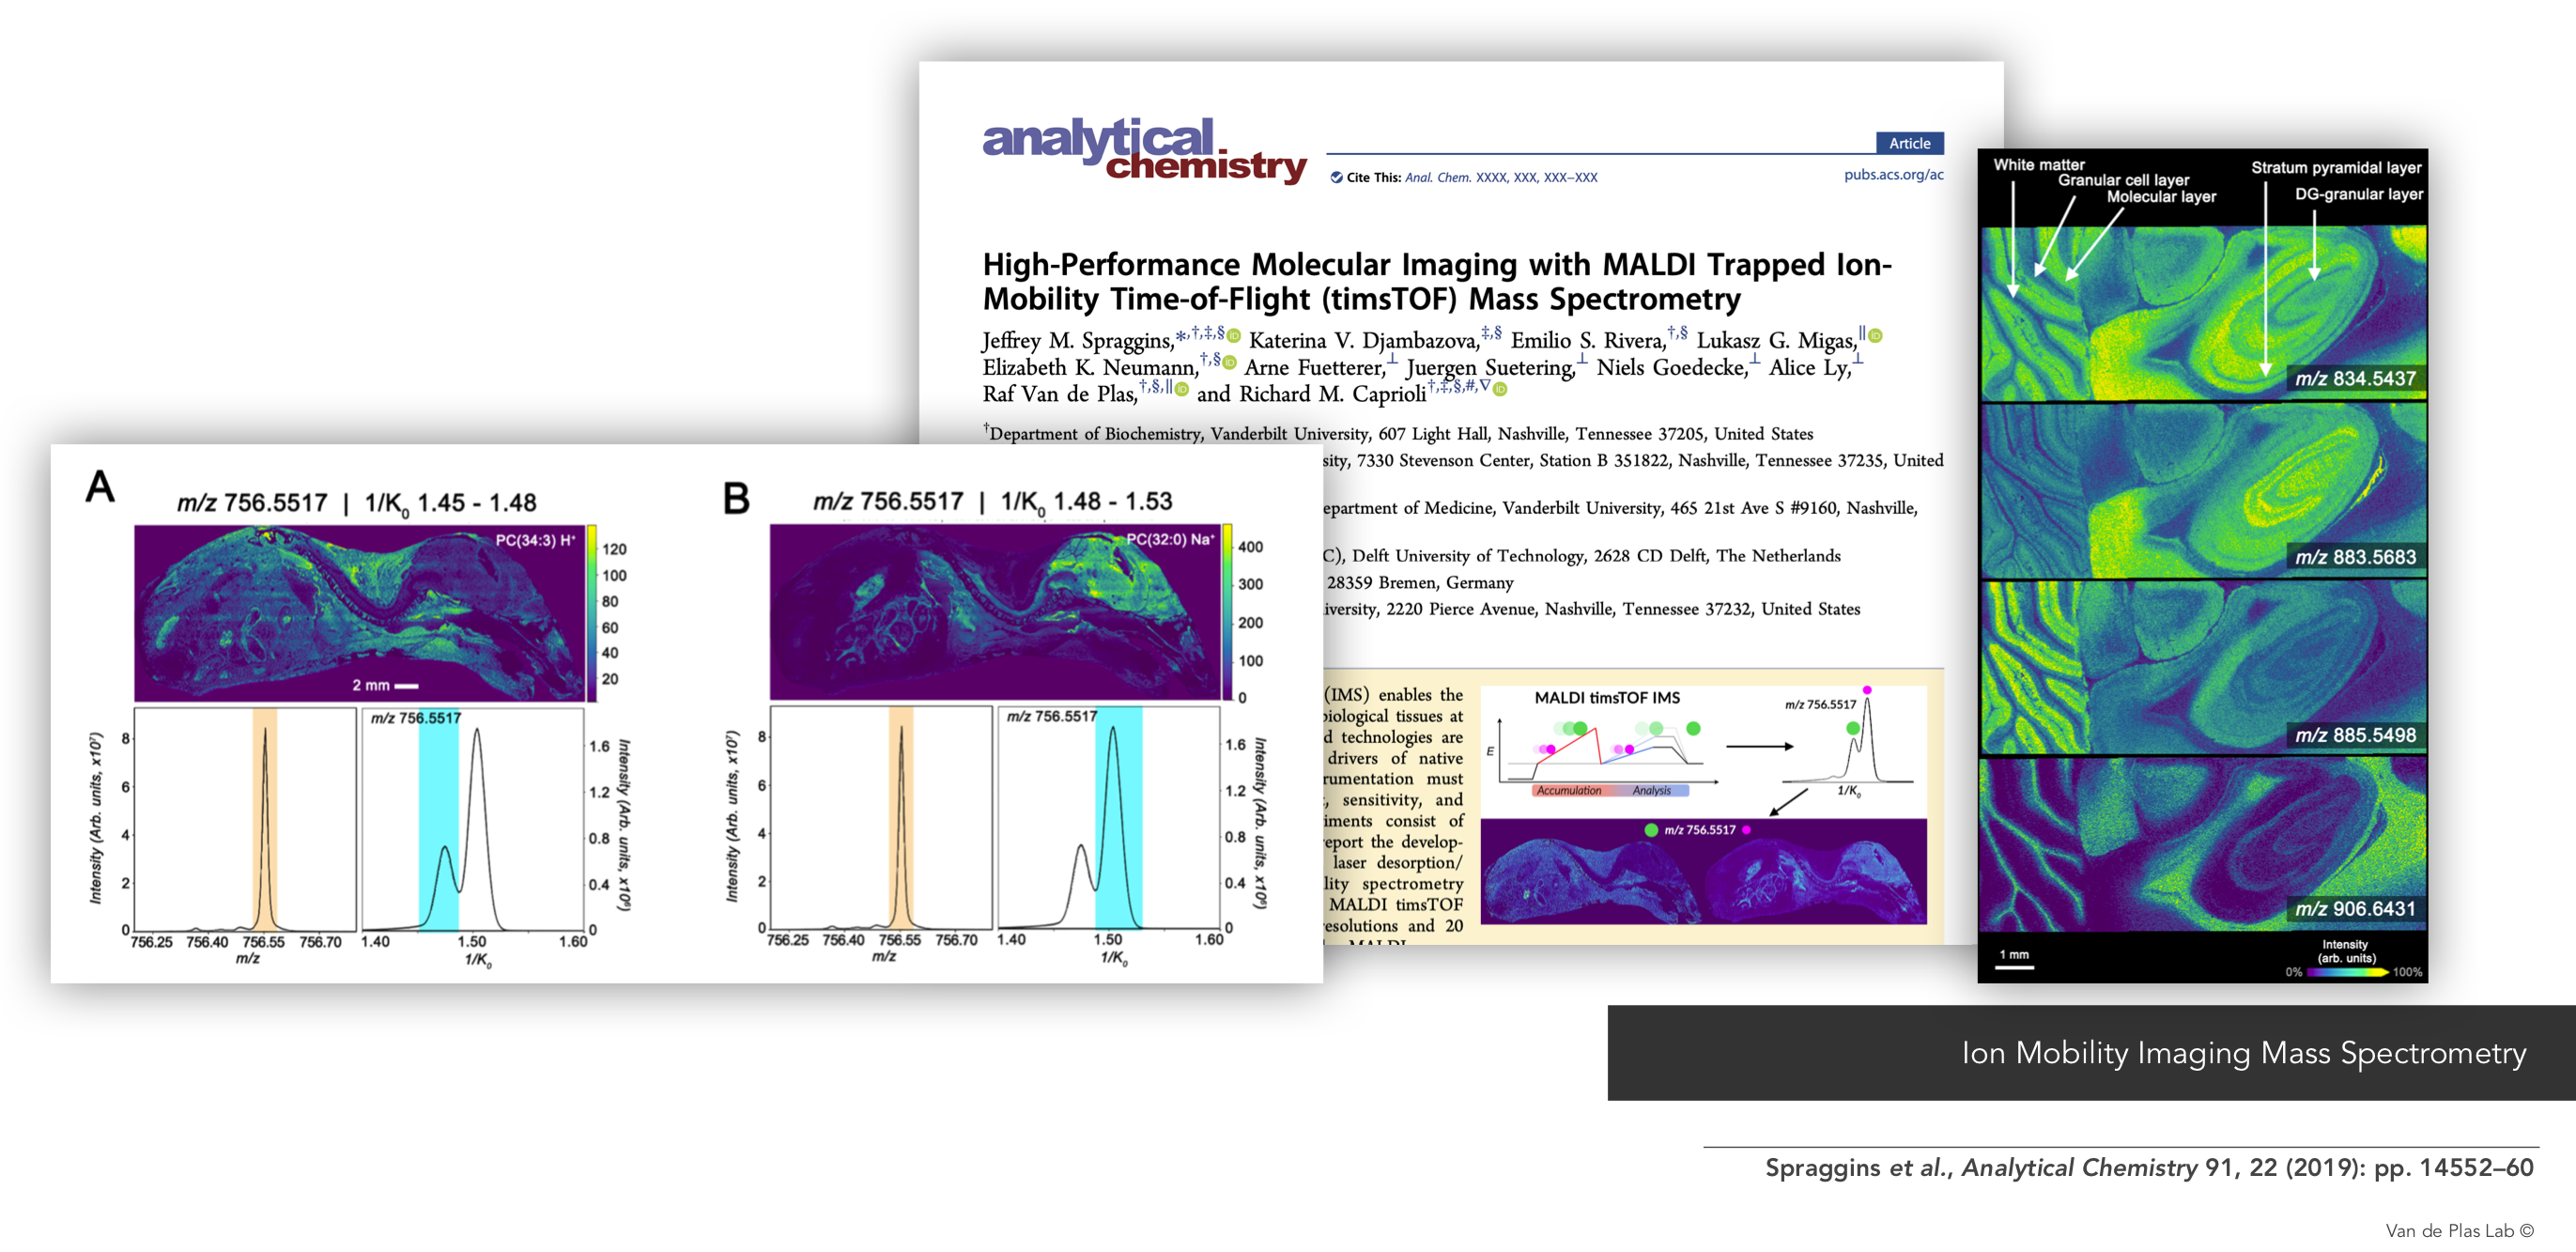 Example of Ion Mobility Imaging Mass Spectrometry: Spraggins et al., Analytical Chemistry 91, 22 (2019): pp. 14552–60